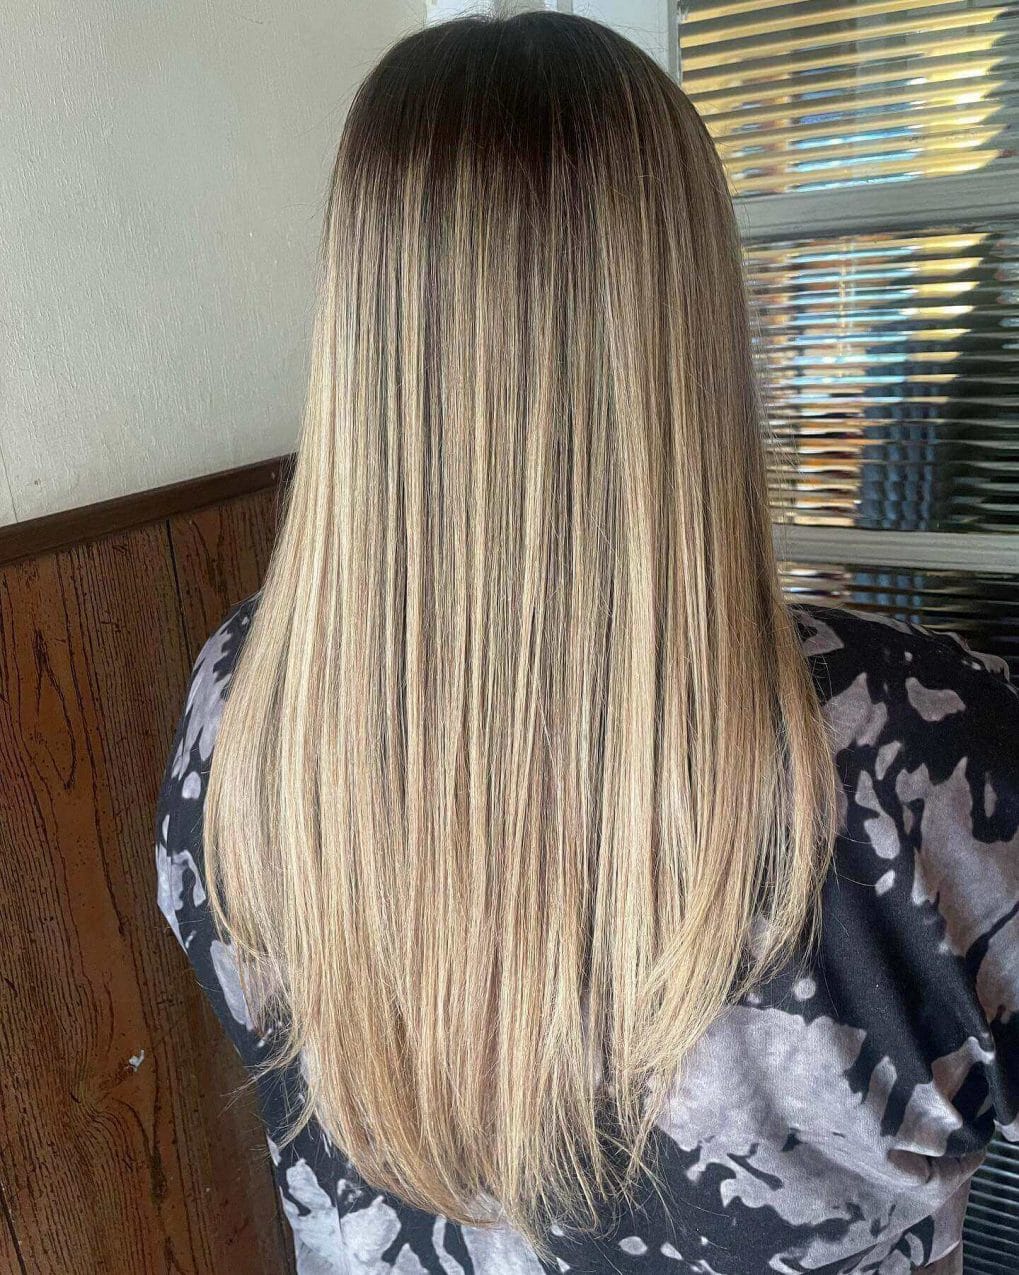 Mid-back length straight hair with dark roots and natural blonde balayage.